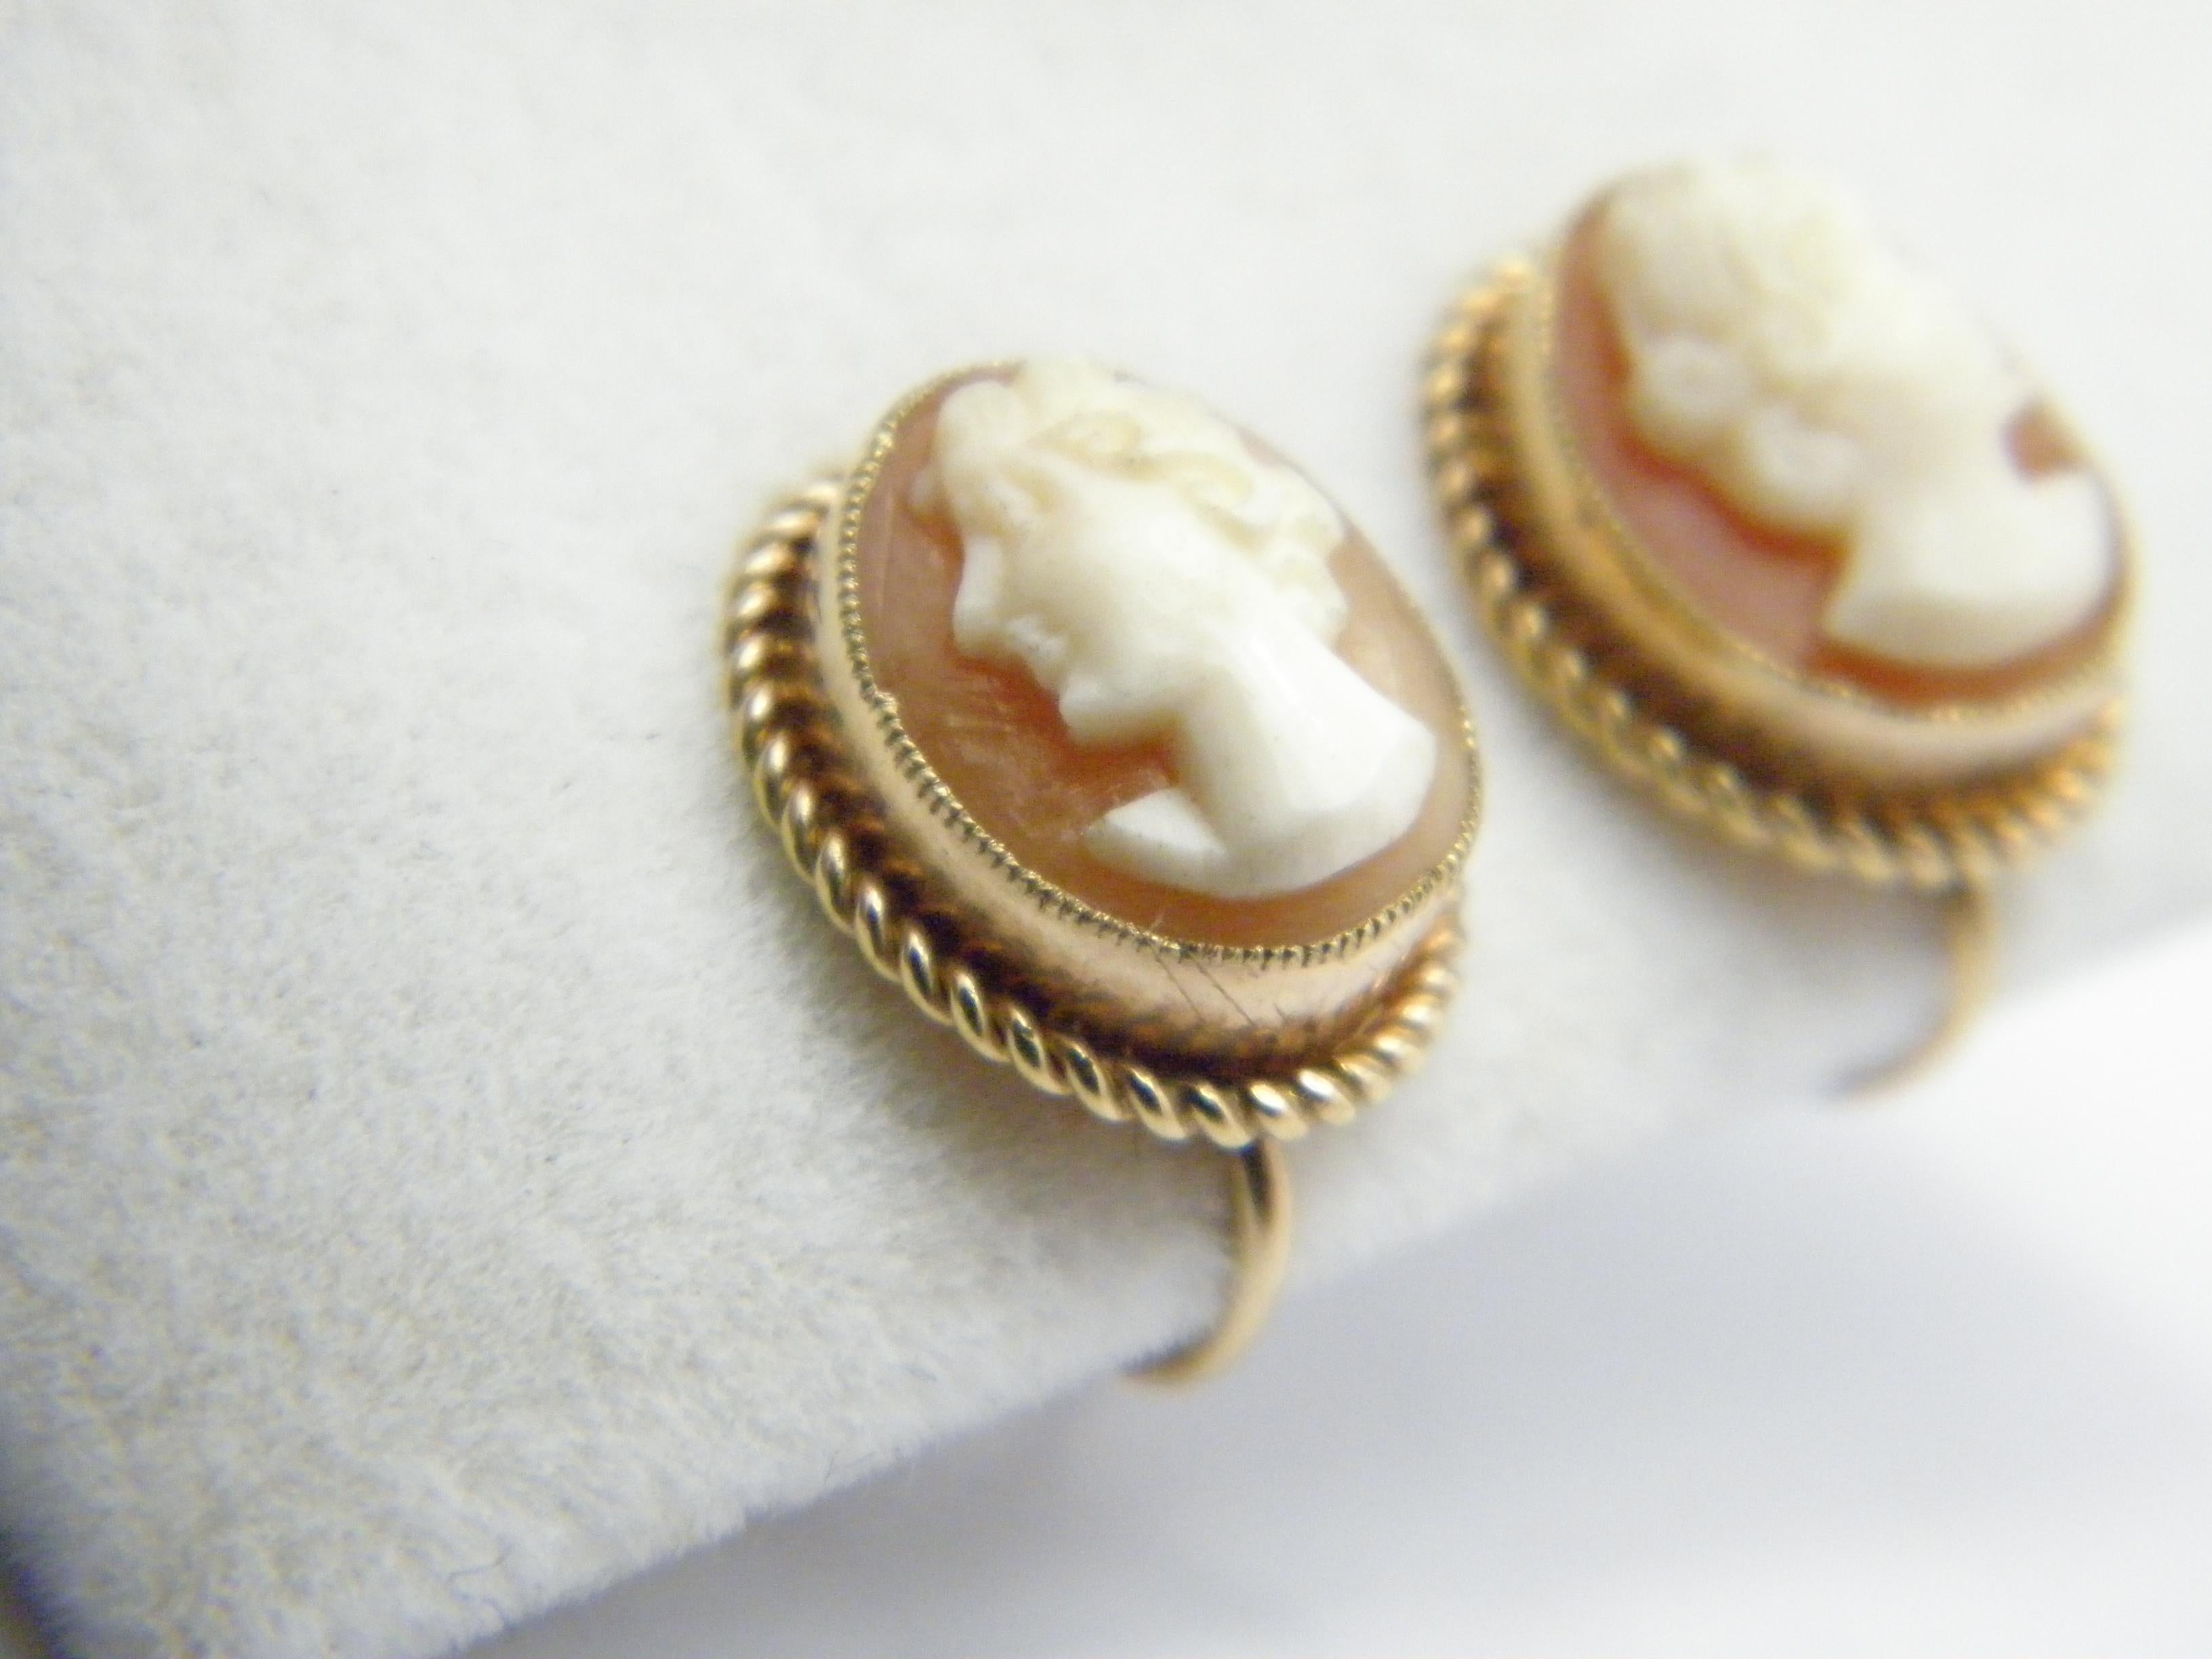 9ct gold cameo earrings